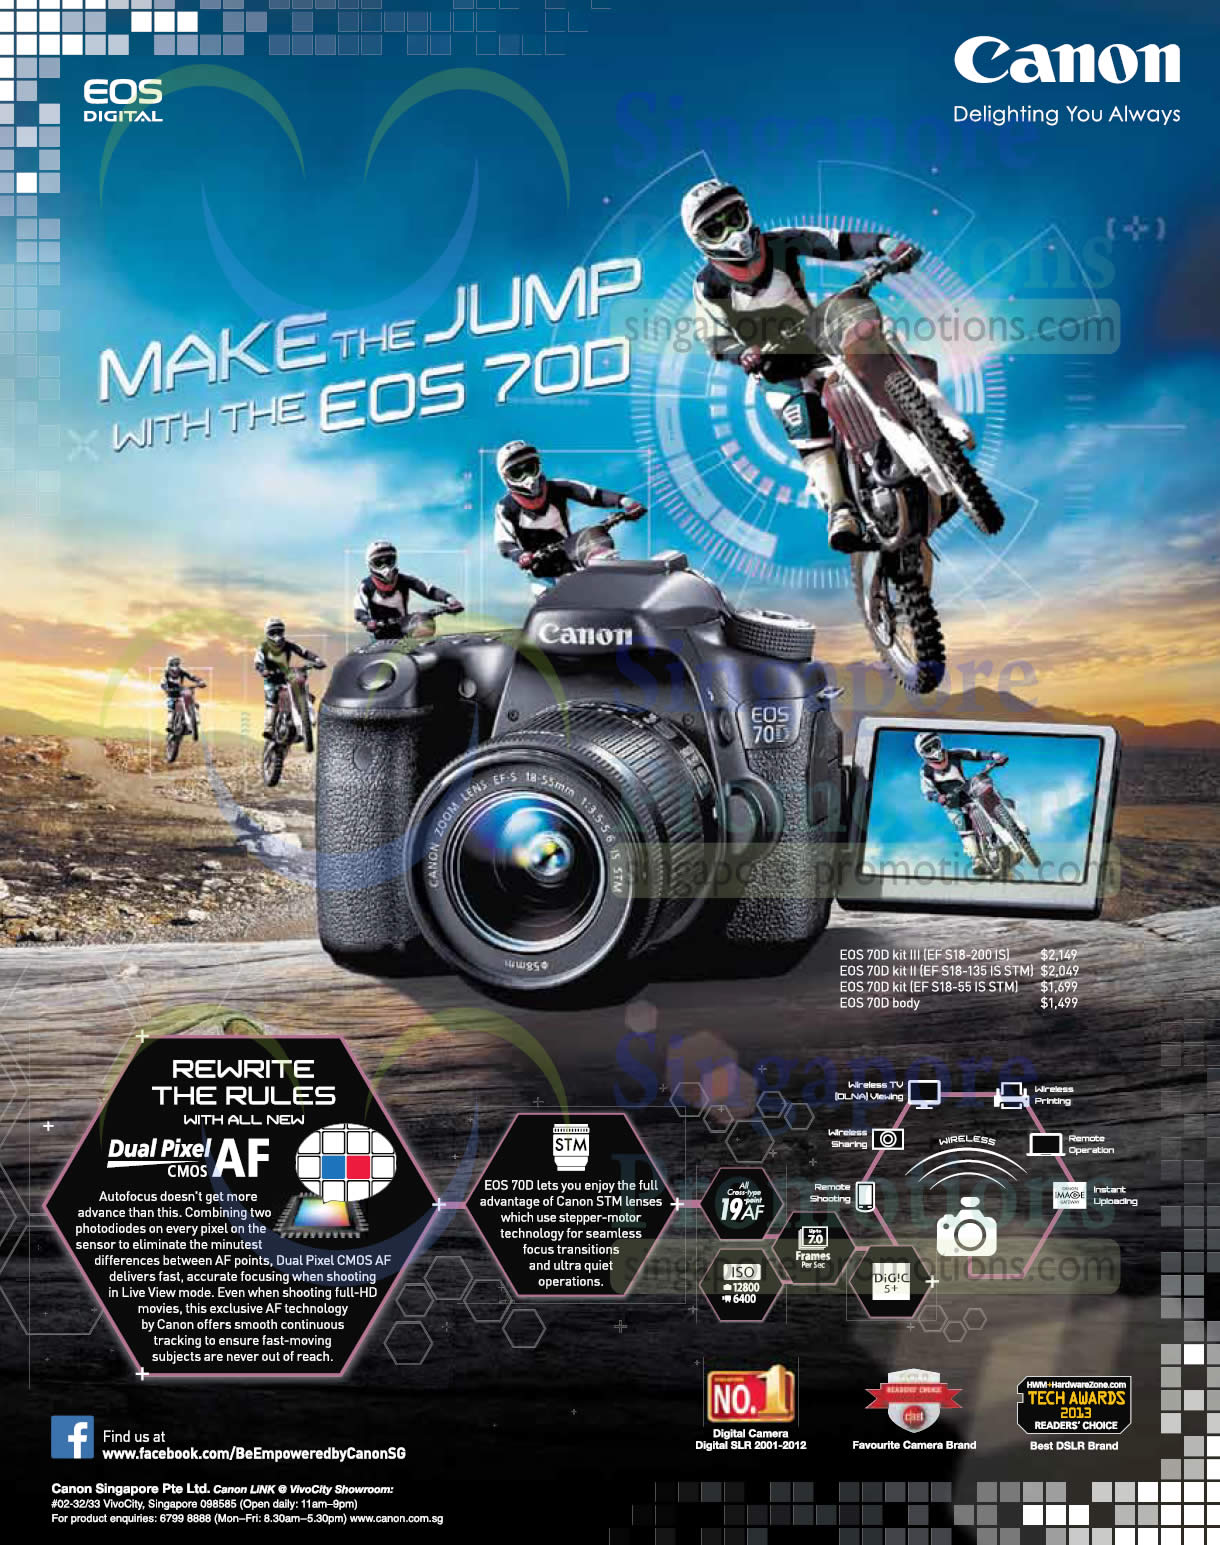 Featured image for Canon EOS 70D DSLR Digital Camera Features & Price 27 Sep 2013